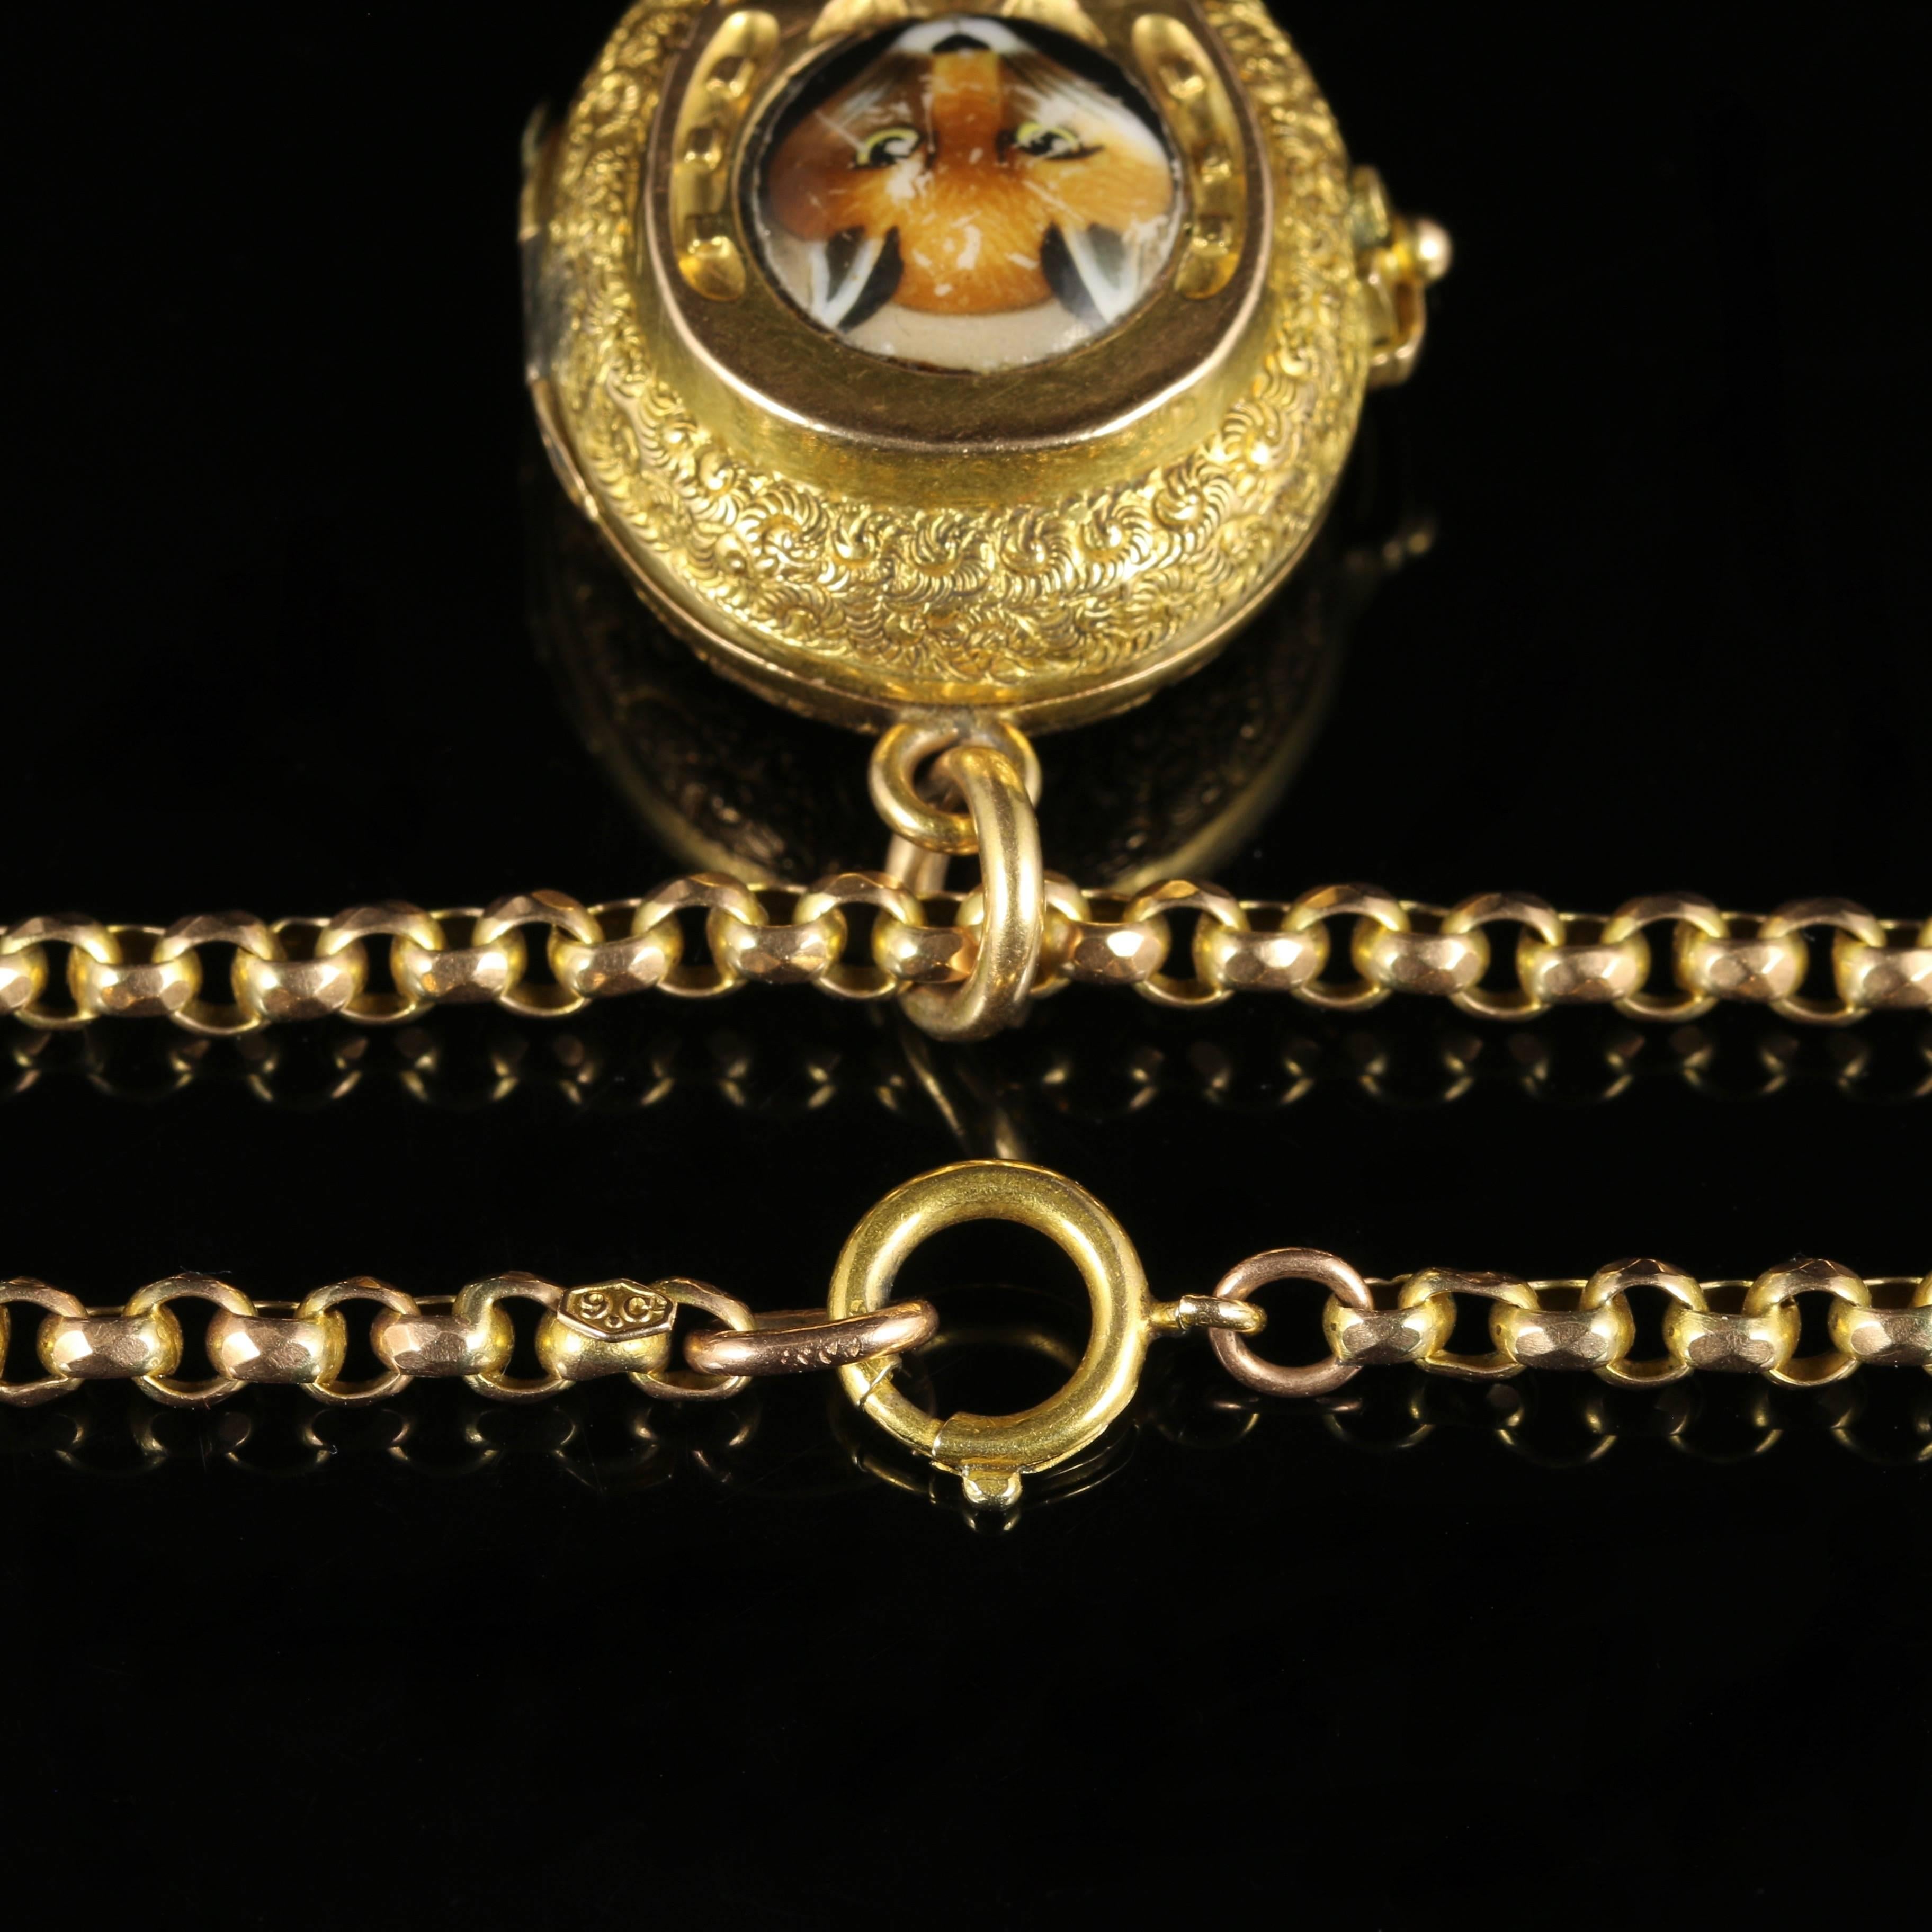 Antique Victorian Fox Hunting Necklace Gold Locket and Chain, circa 1900 2